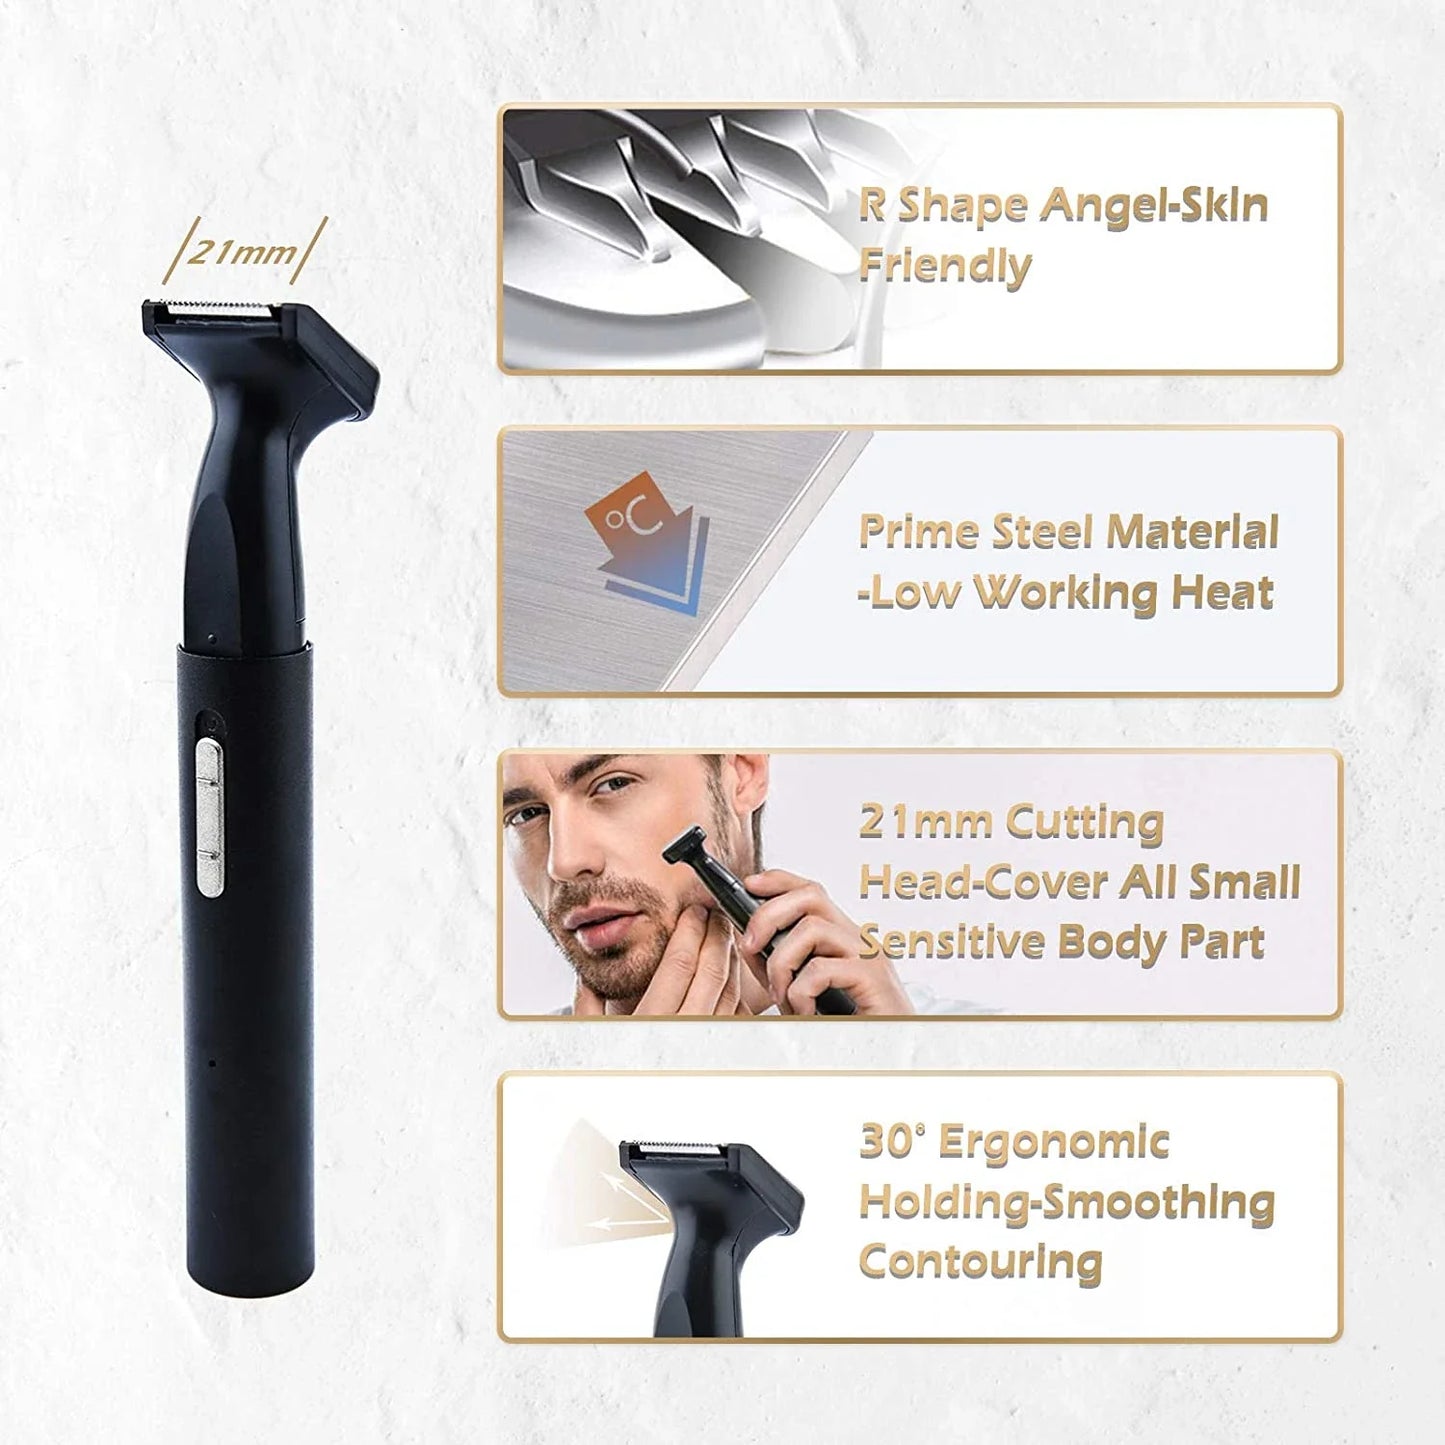 Ear and Nose Hair Trimmer for Men & Women - Men's Grooming Electric Razor Hair Clippers & Eyebrow Hair Trimmer Women